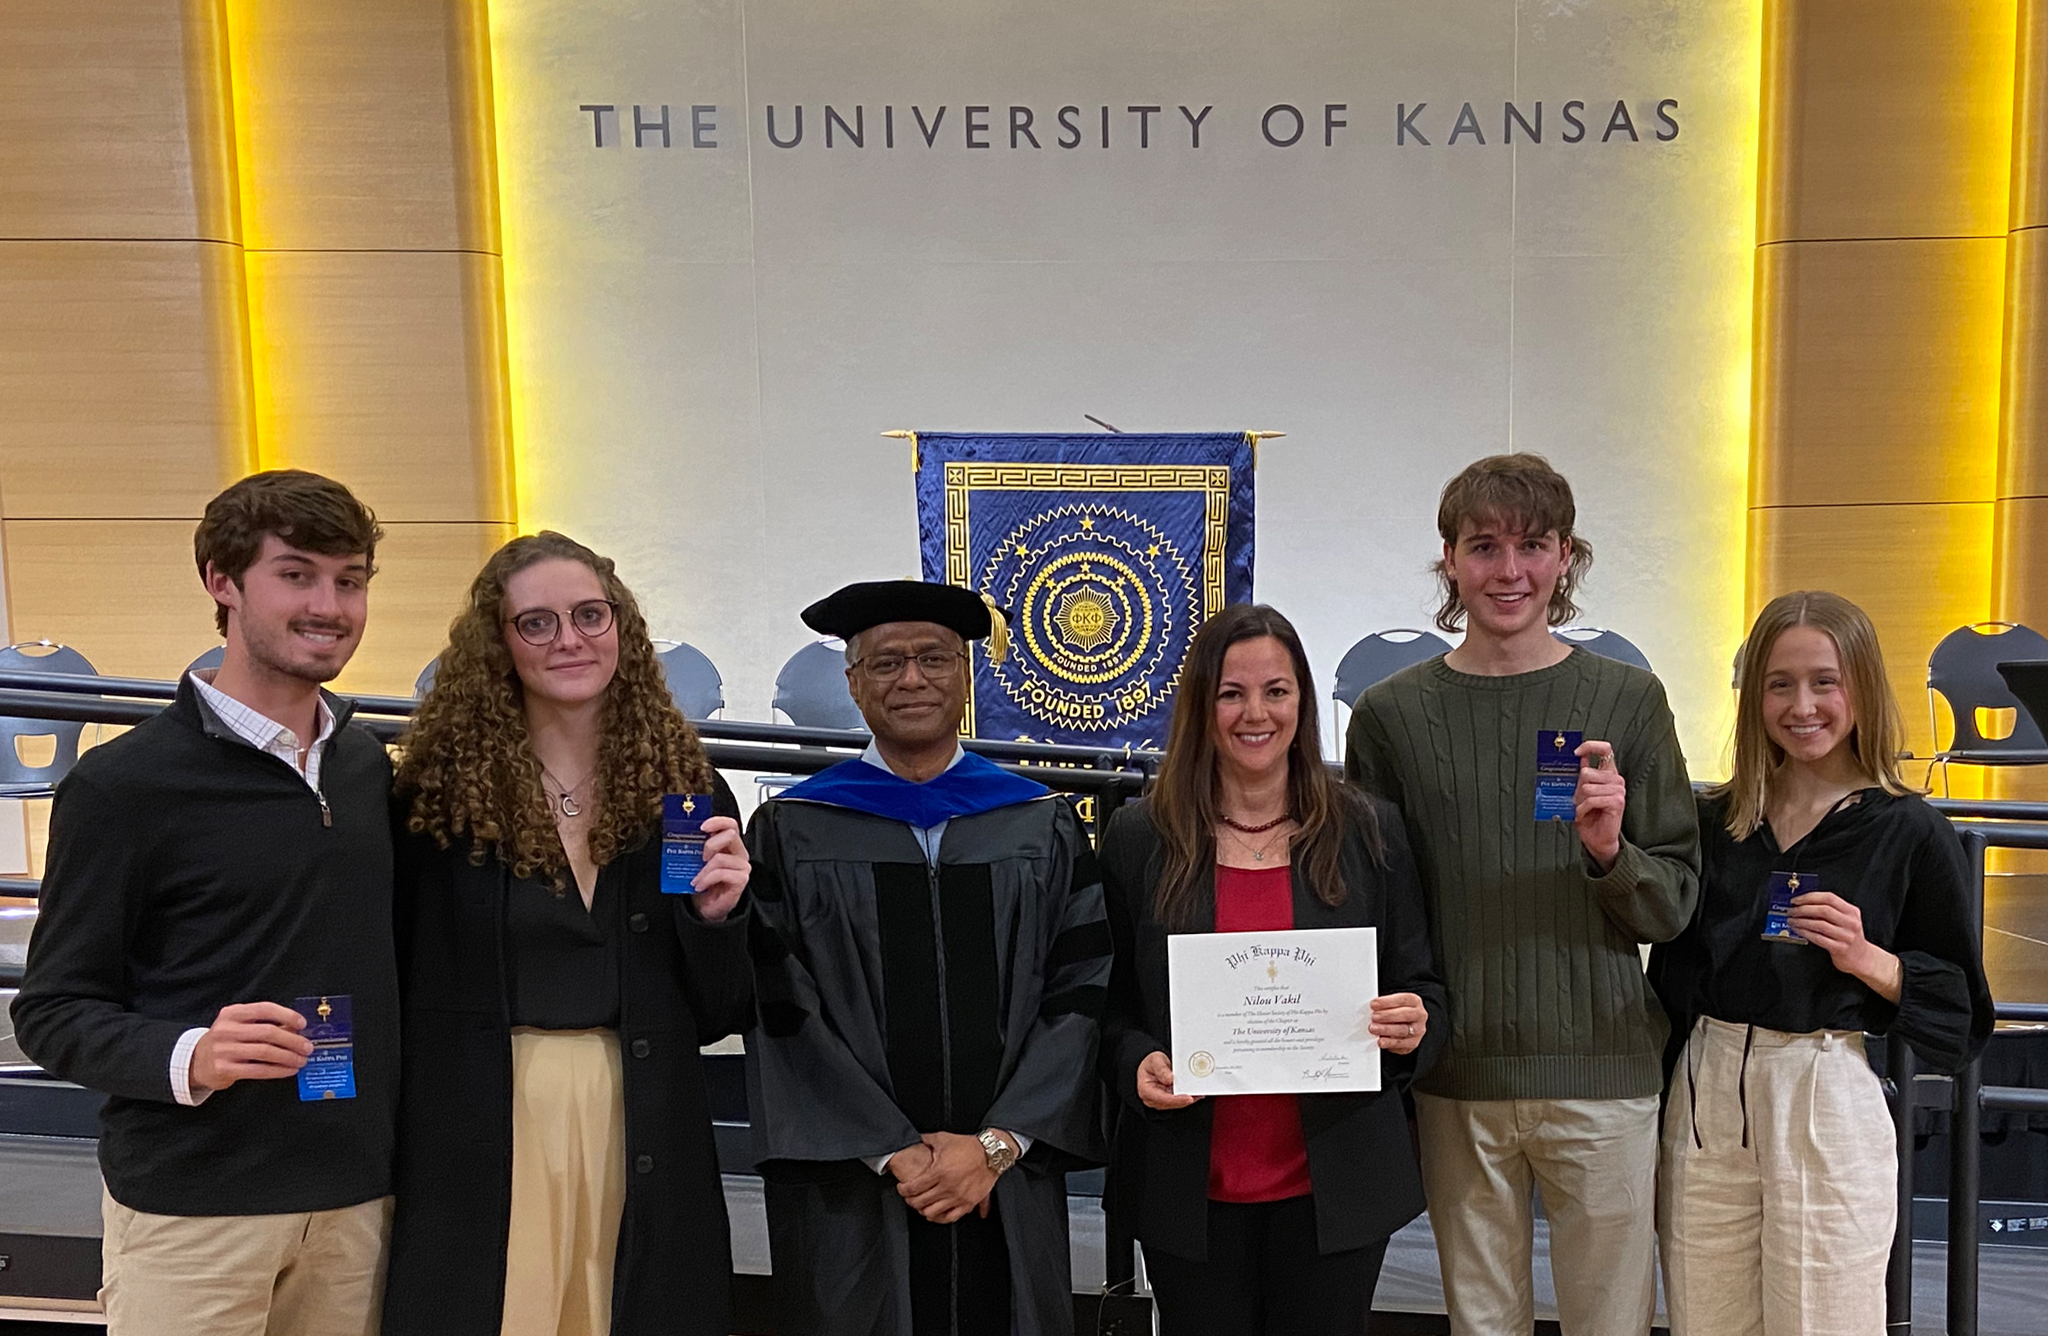 Students pose with faculty at event in ballroom at the University of Kansas.